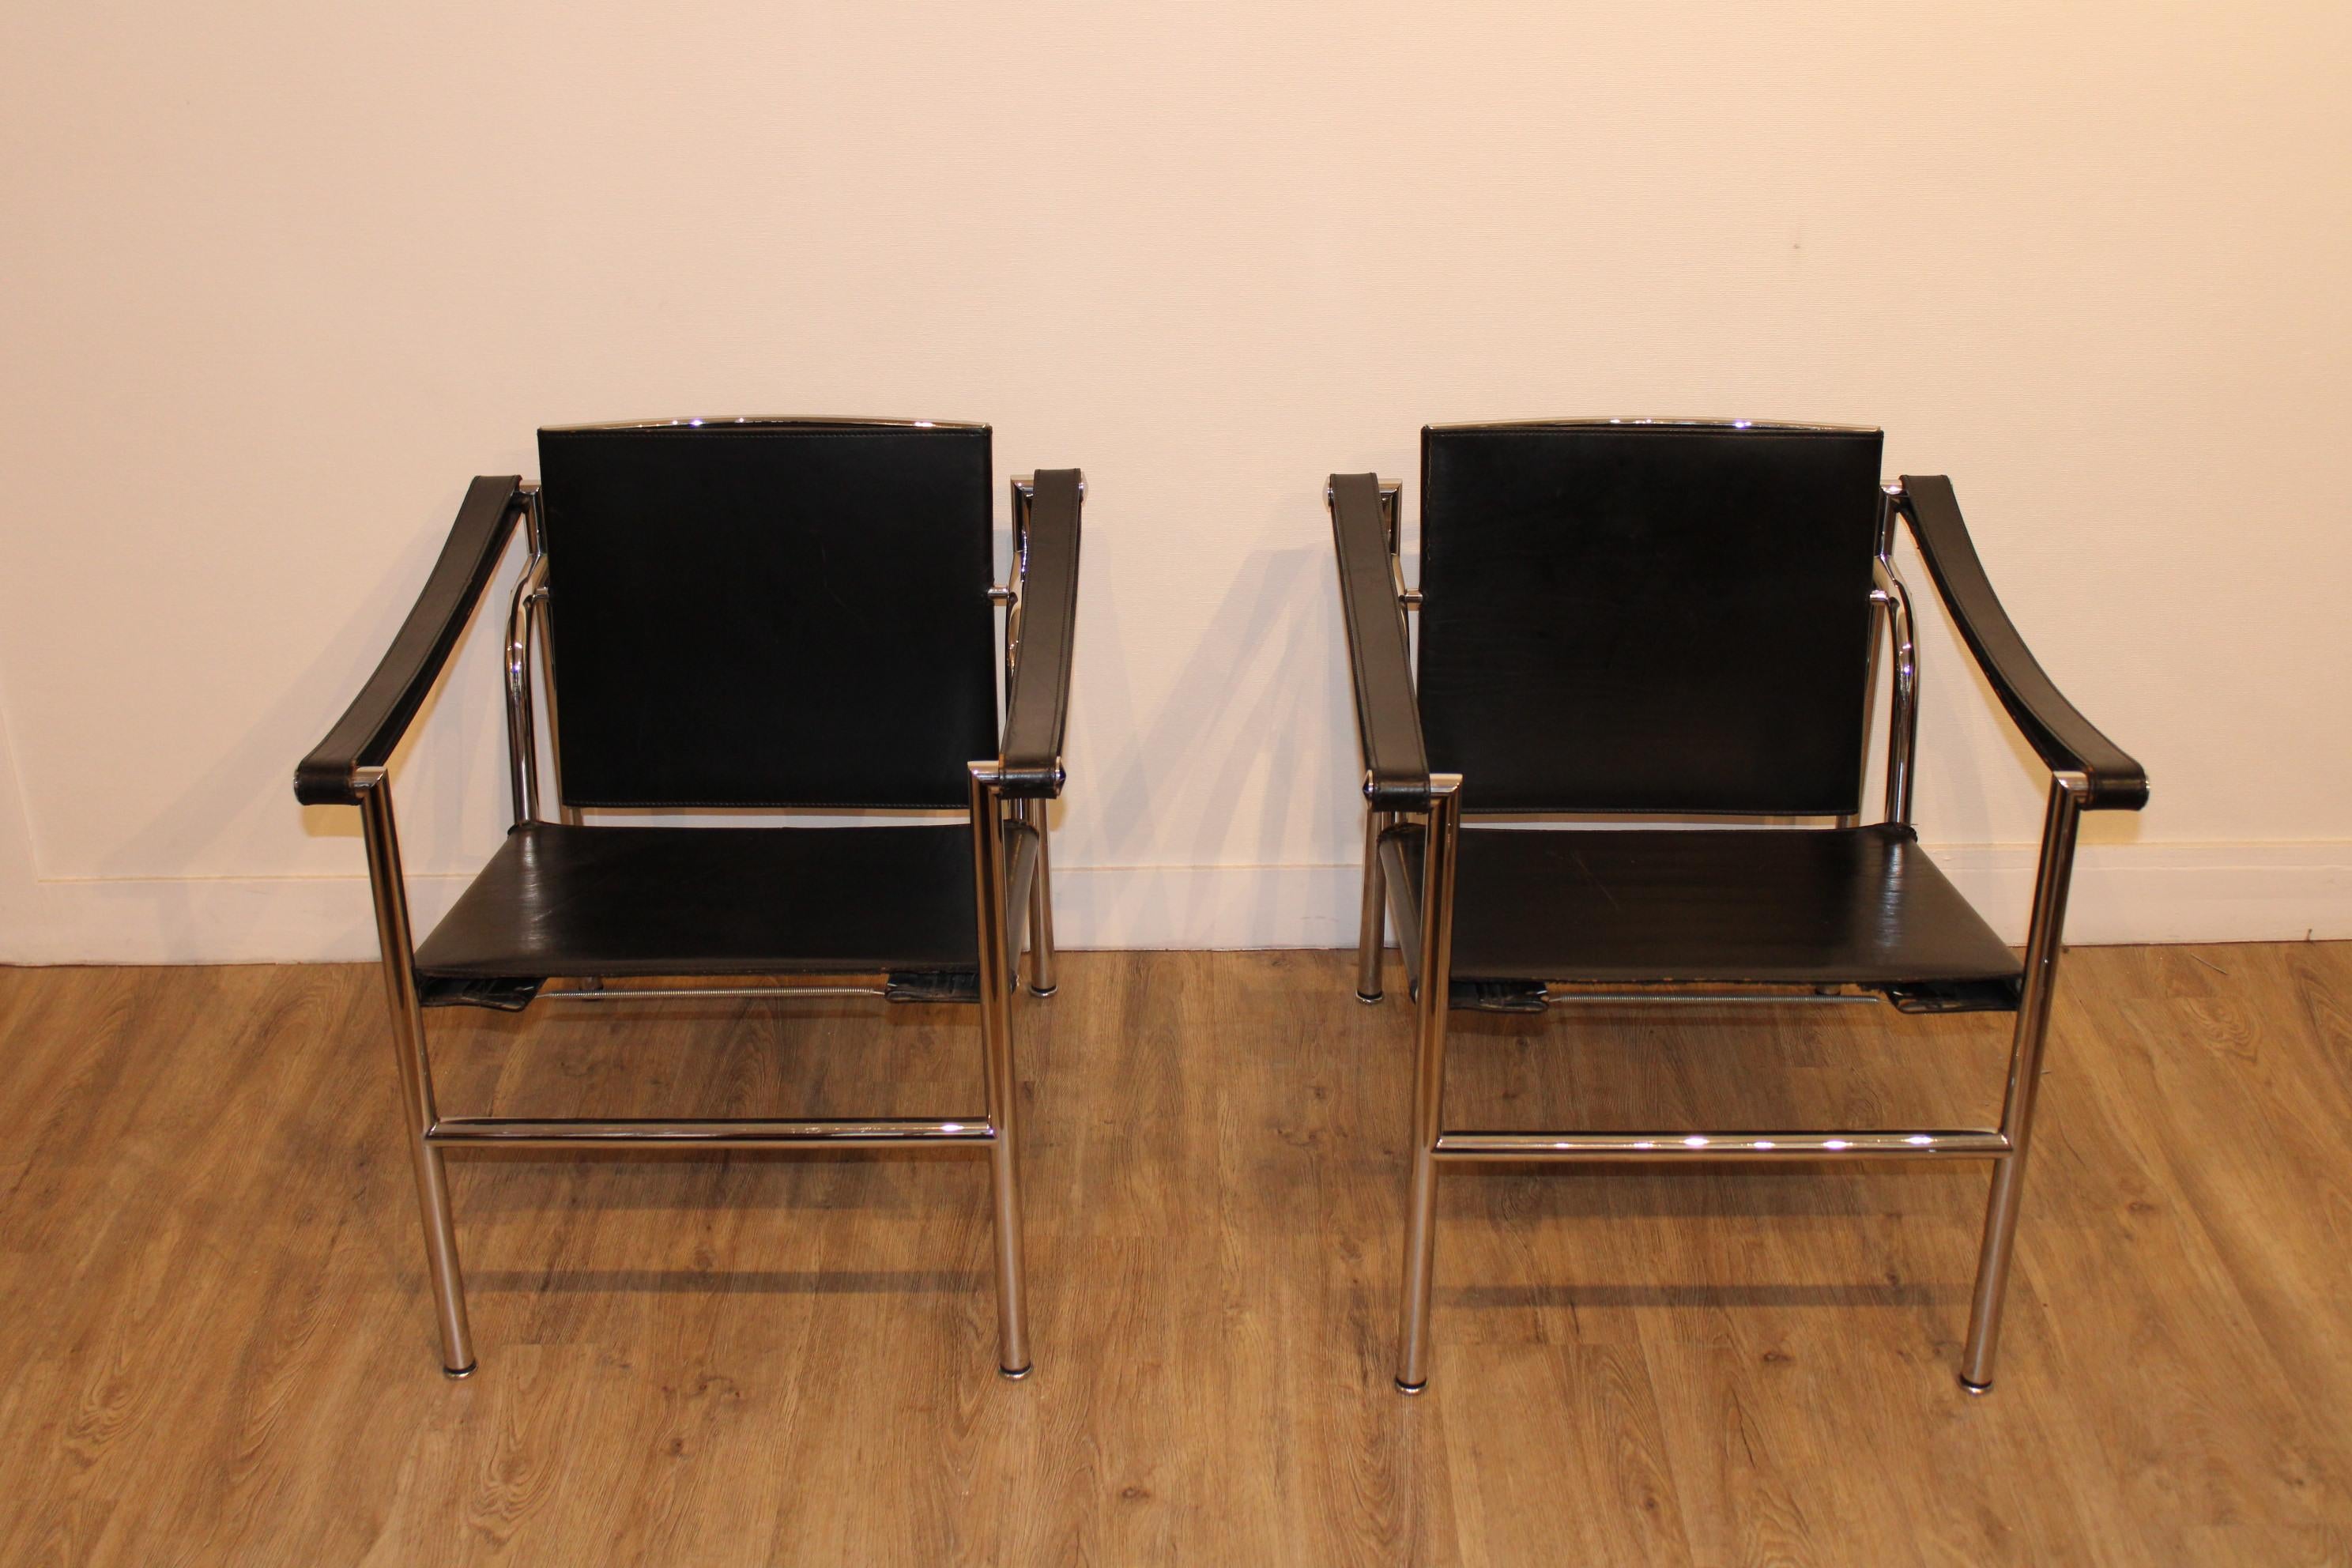 Pair of the LC1 design armchairs
Tilt back armchairs
by Le Corbusier, Jeanneret and Perriand
Edited by Cassina, from 1965

Good vintage conditions (metal pitted, leather wear on the armrests : see photos).